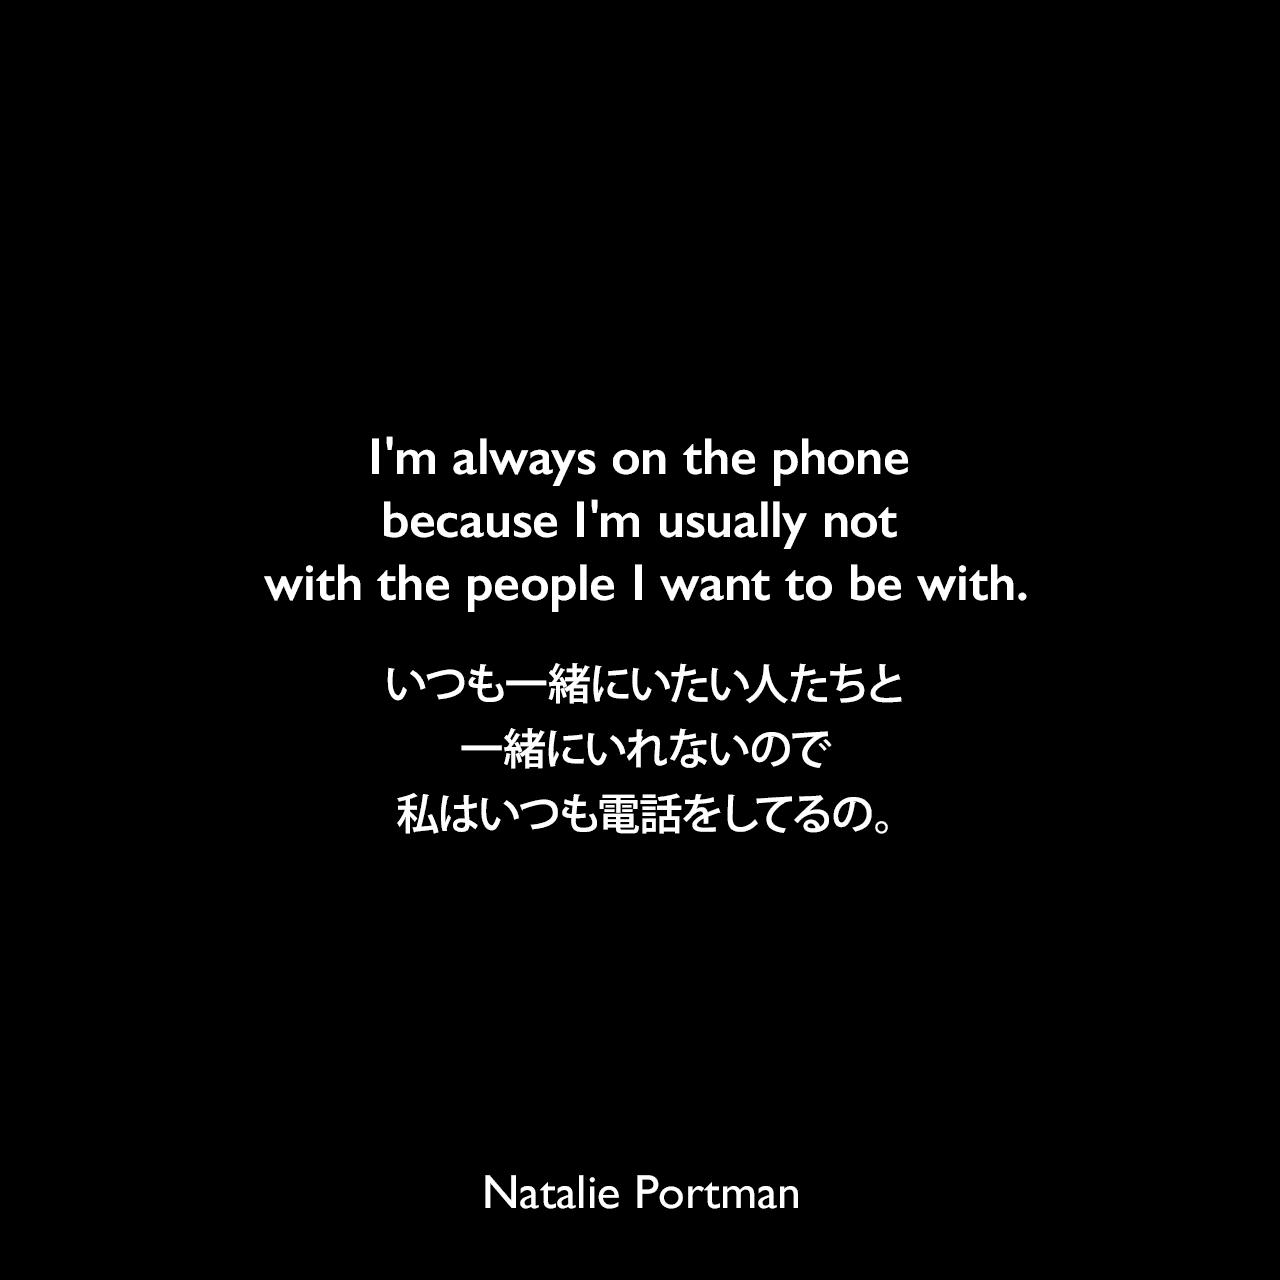 I'm always on the phone because I'm usually not with the people I want to be with.いつも一緒にいたい人たちと一緒にいれないので、私はいつも電話をしてるの。Natalie Portman